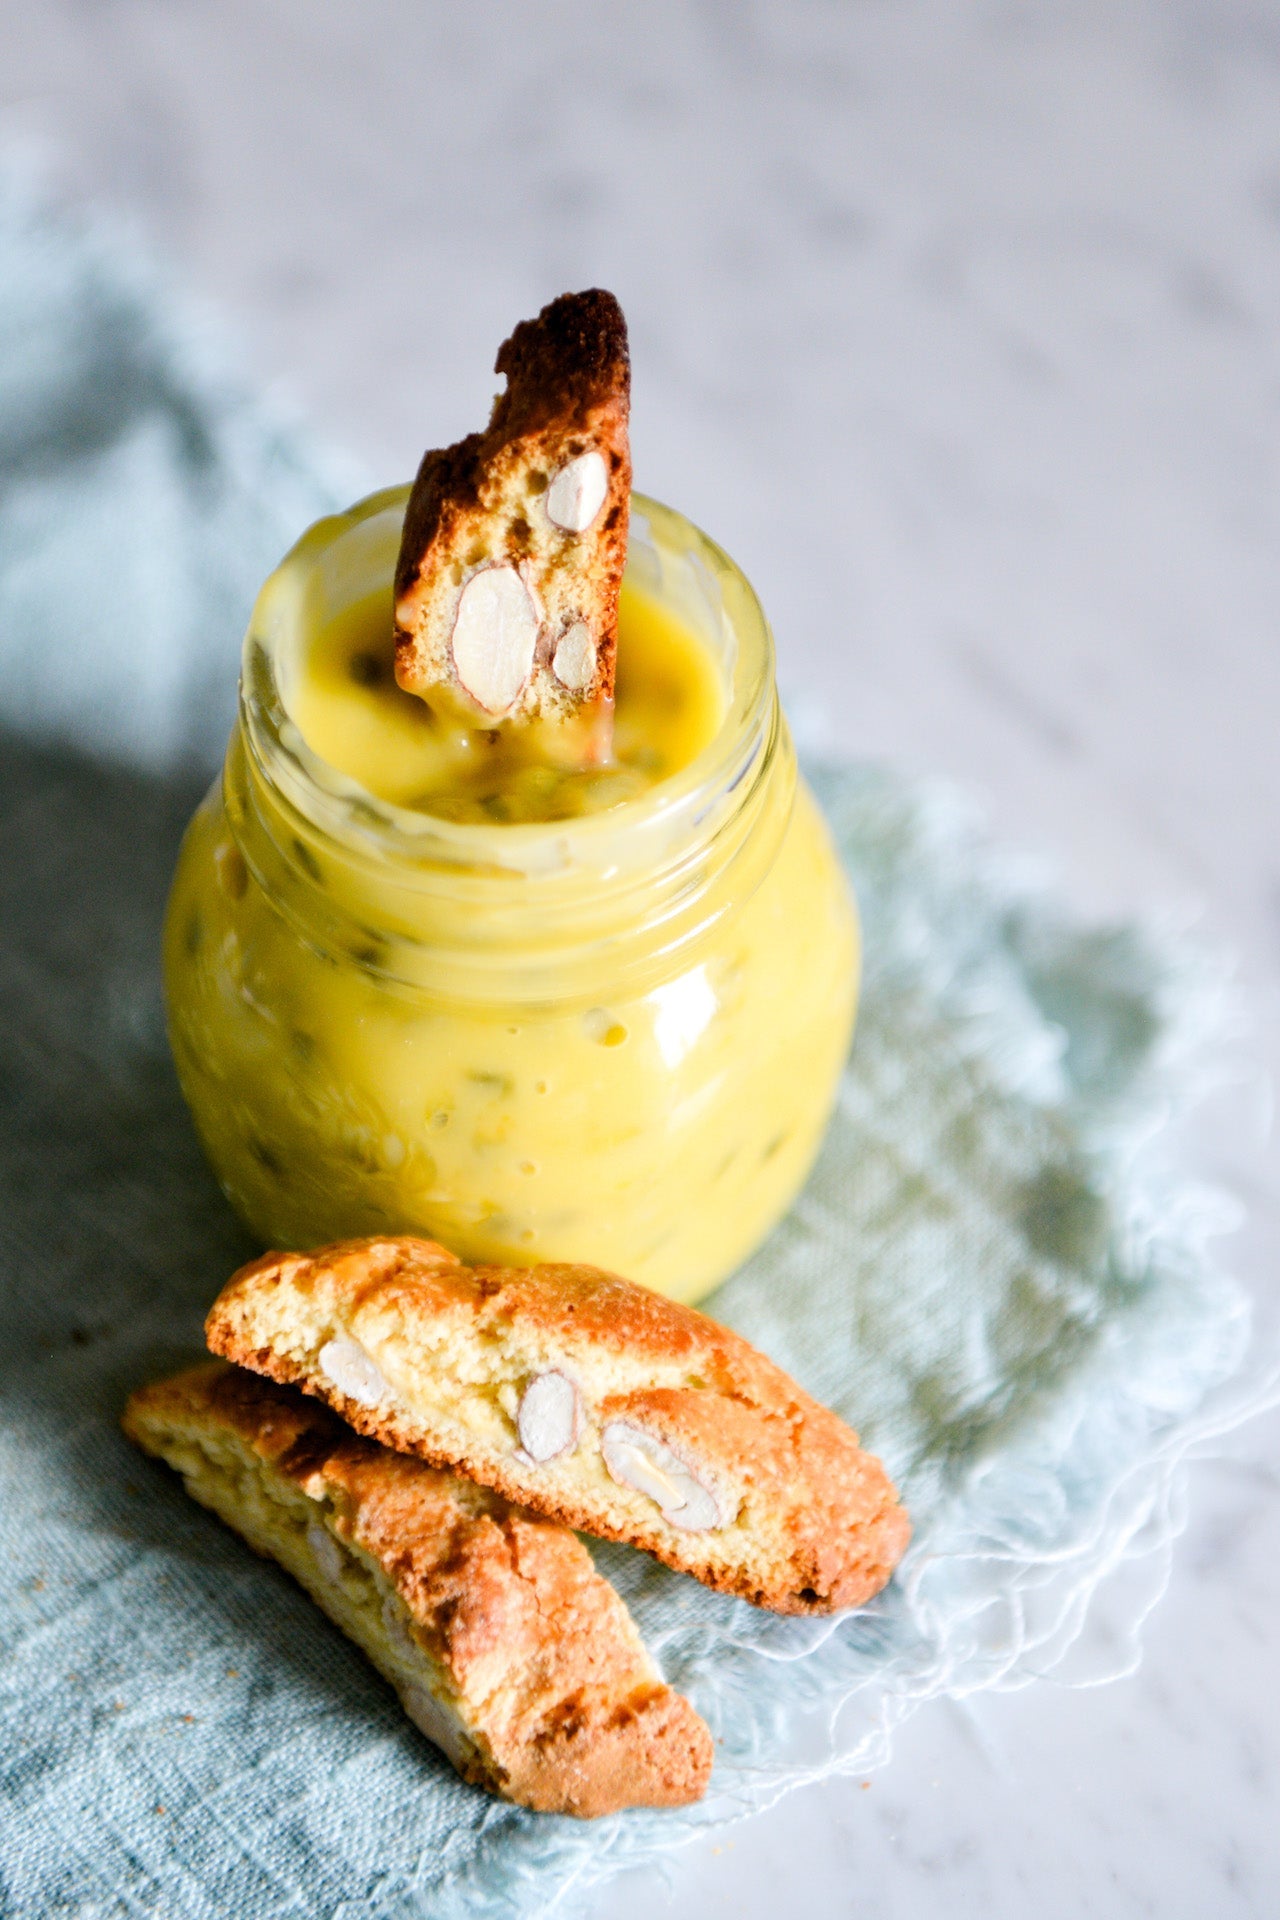 Passionfruit Curd Recipe with Tuscany Cantuccini - Feast Italy